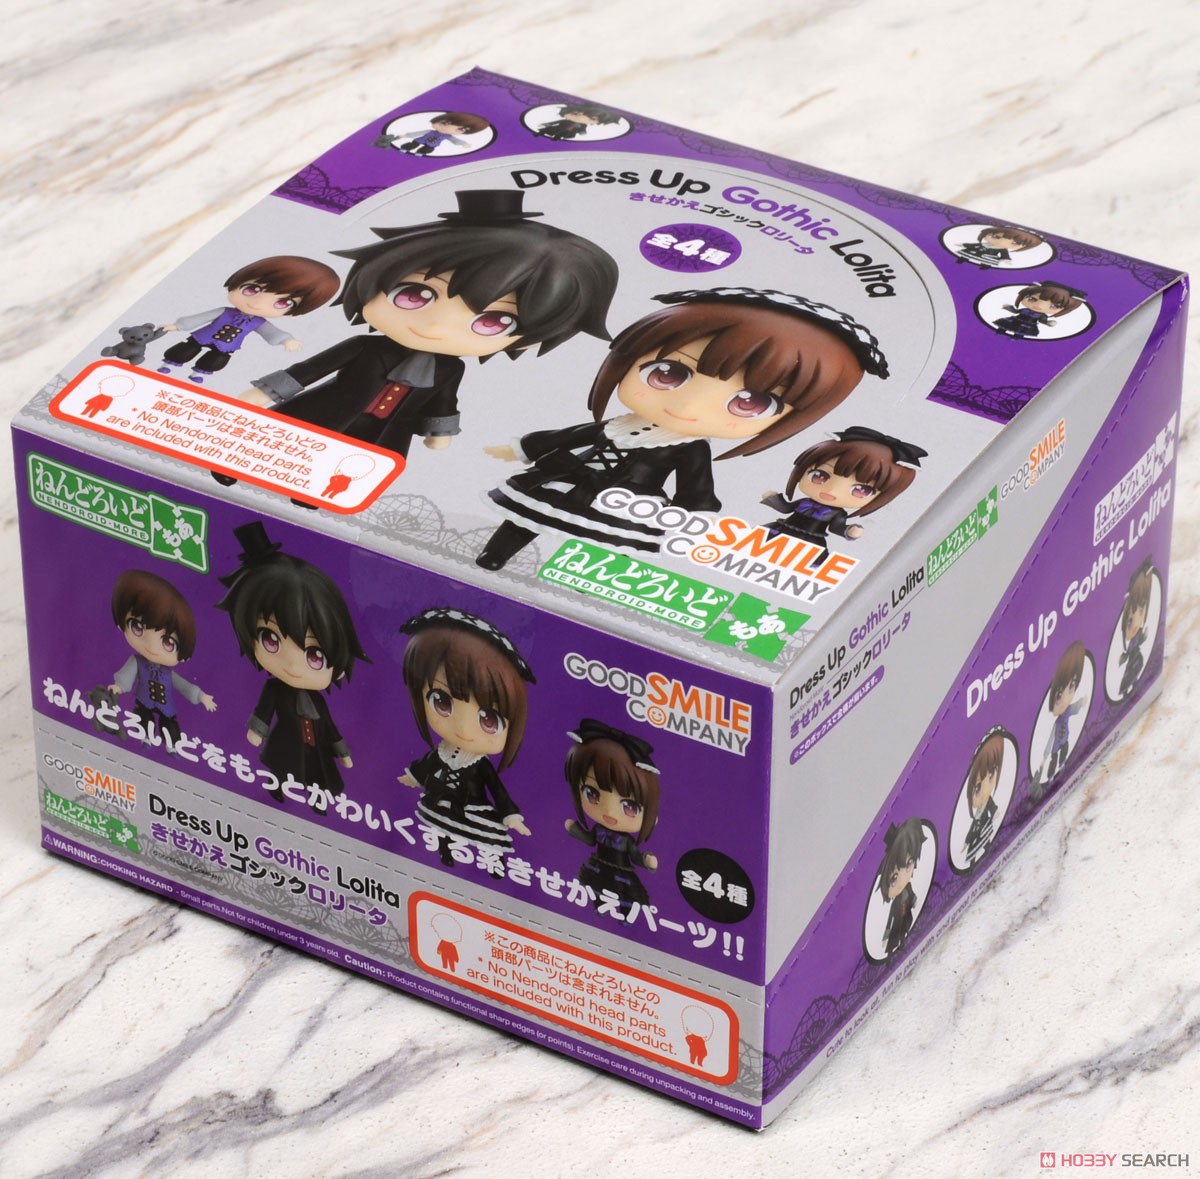 Nendoroid More: Dress Up Gothic Lolita (Set of 4) (PVC Figure) Package1